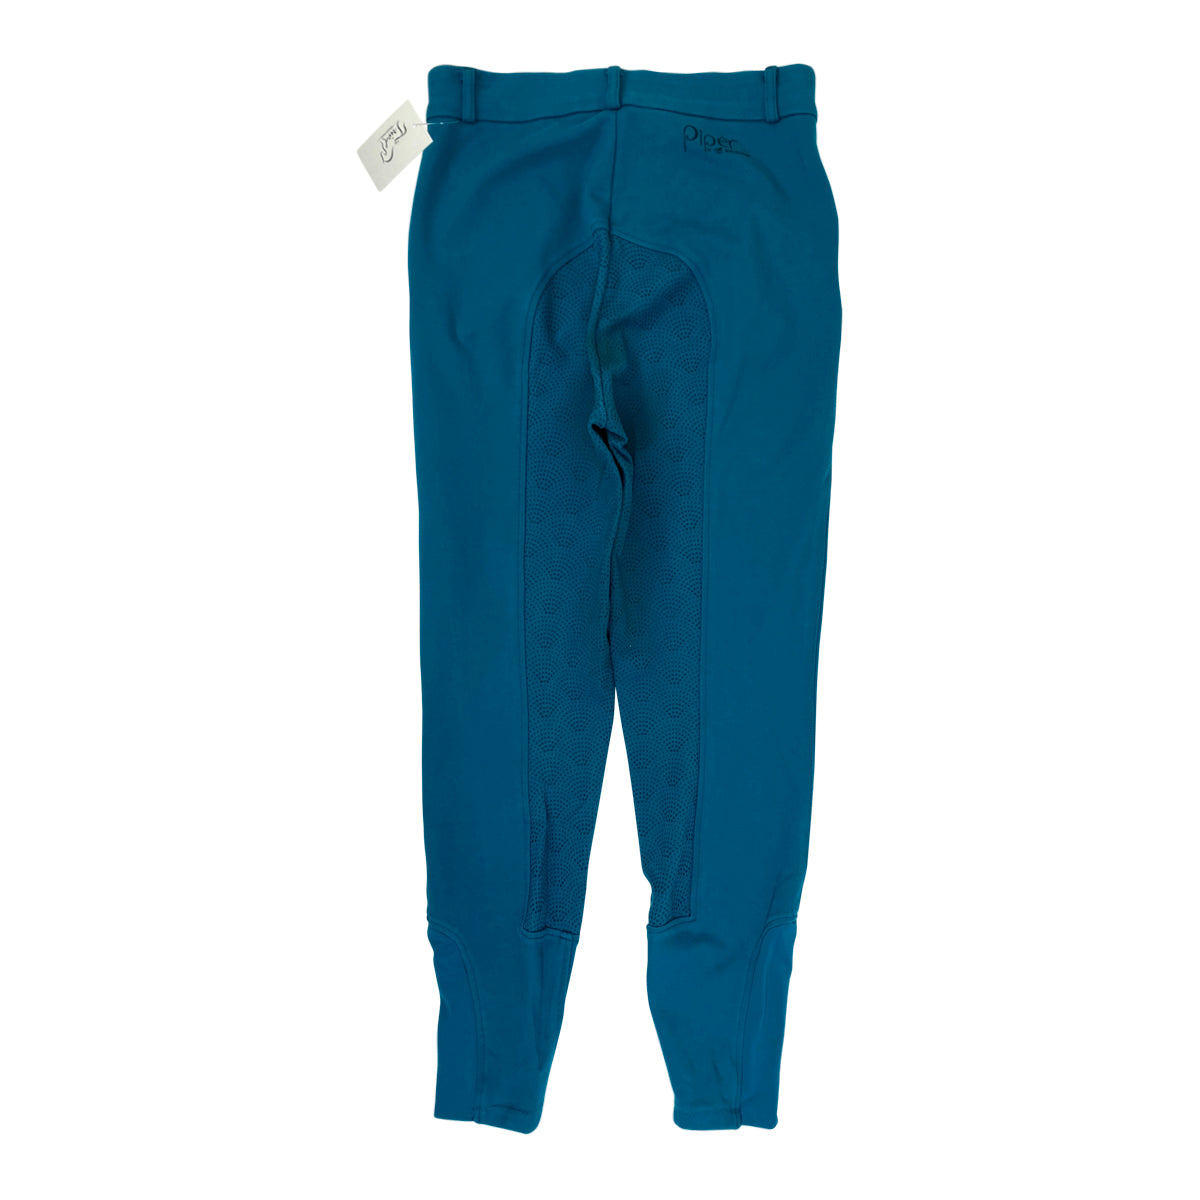 Smartpak Piper Knit Mid-Rise Breeches by SmartPak in Blue